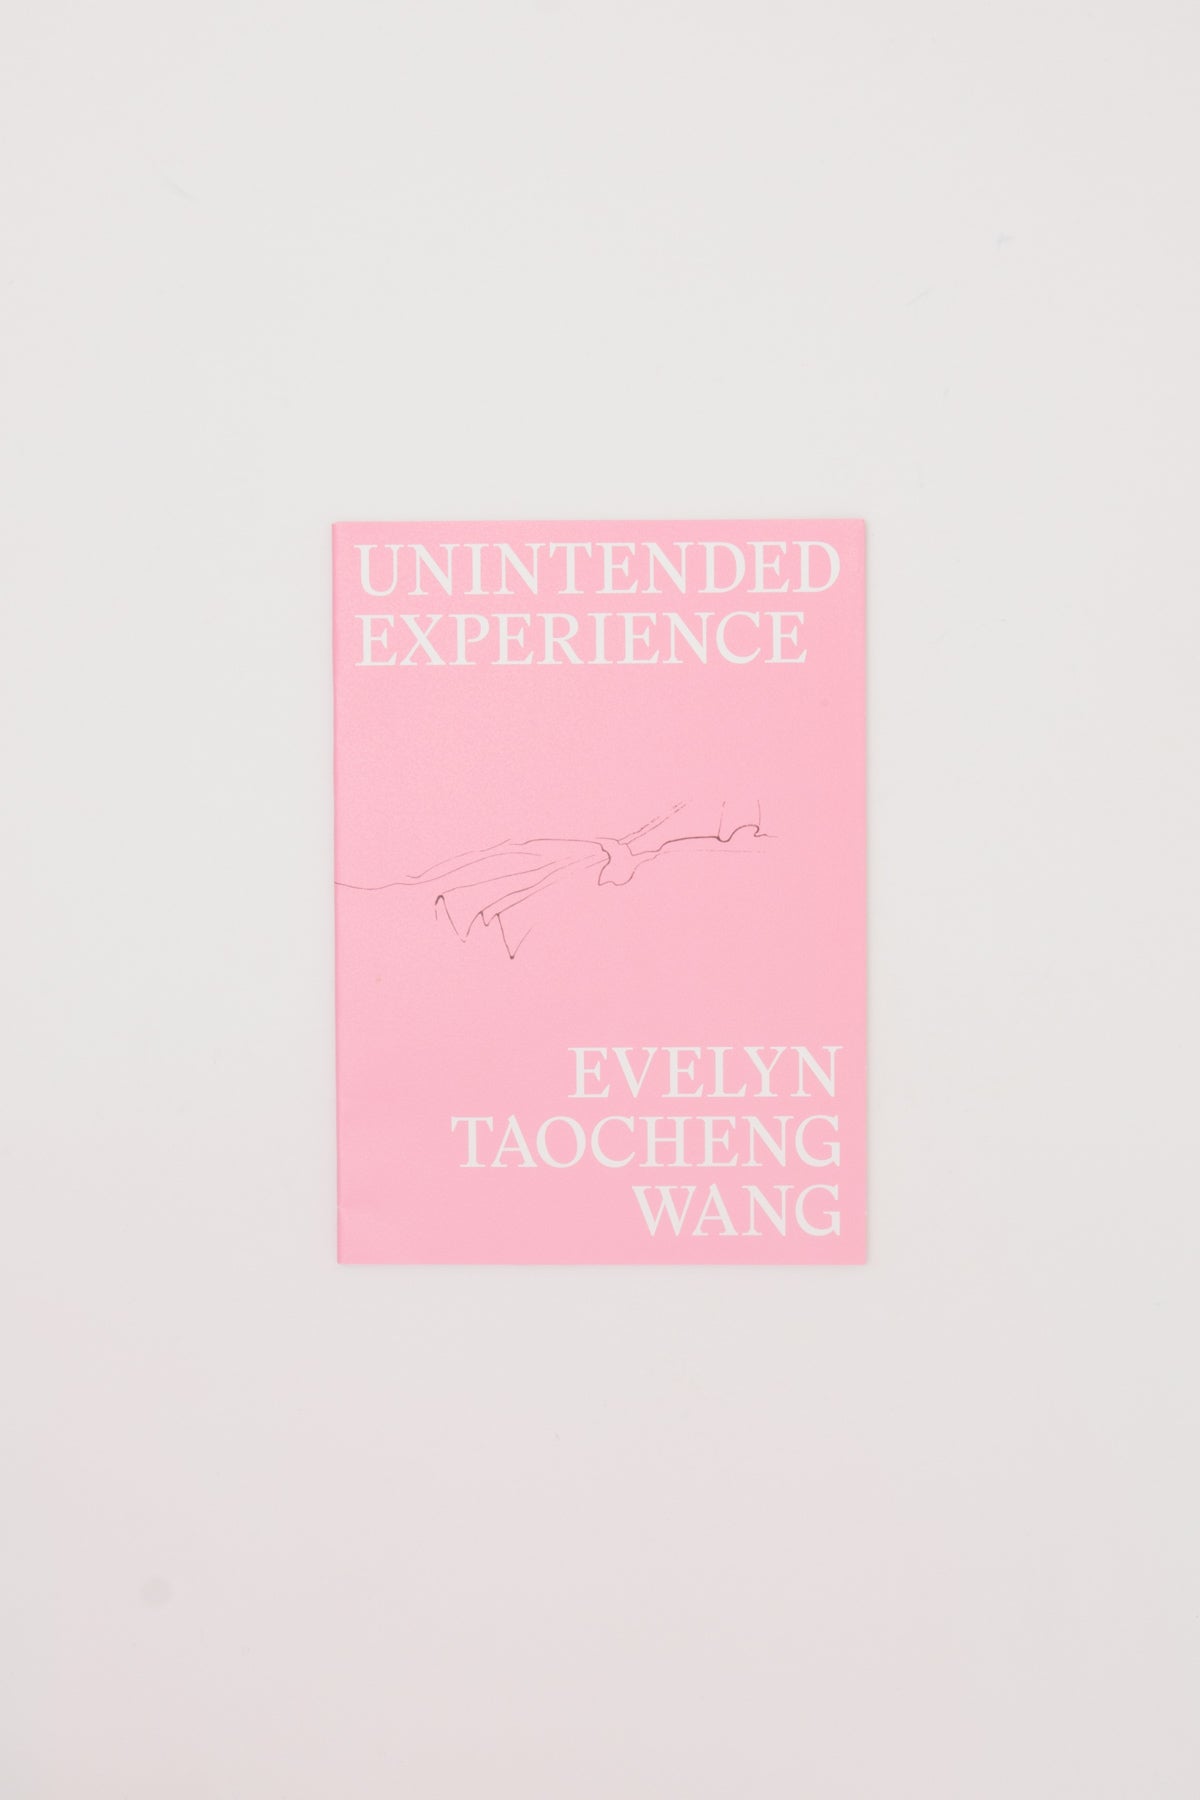 Unintended Experience - Evelyn Taocheng Wang